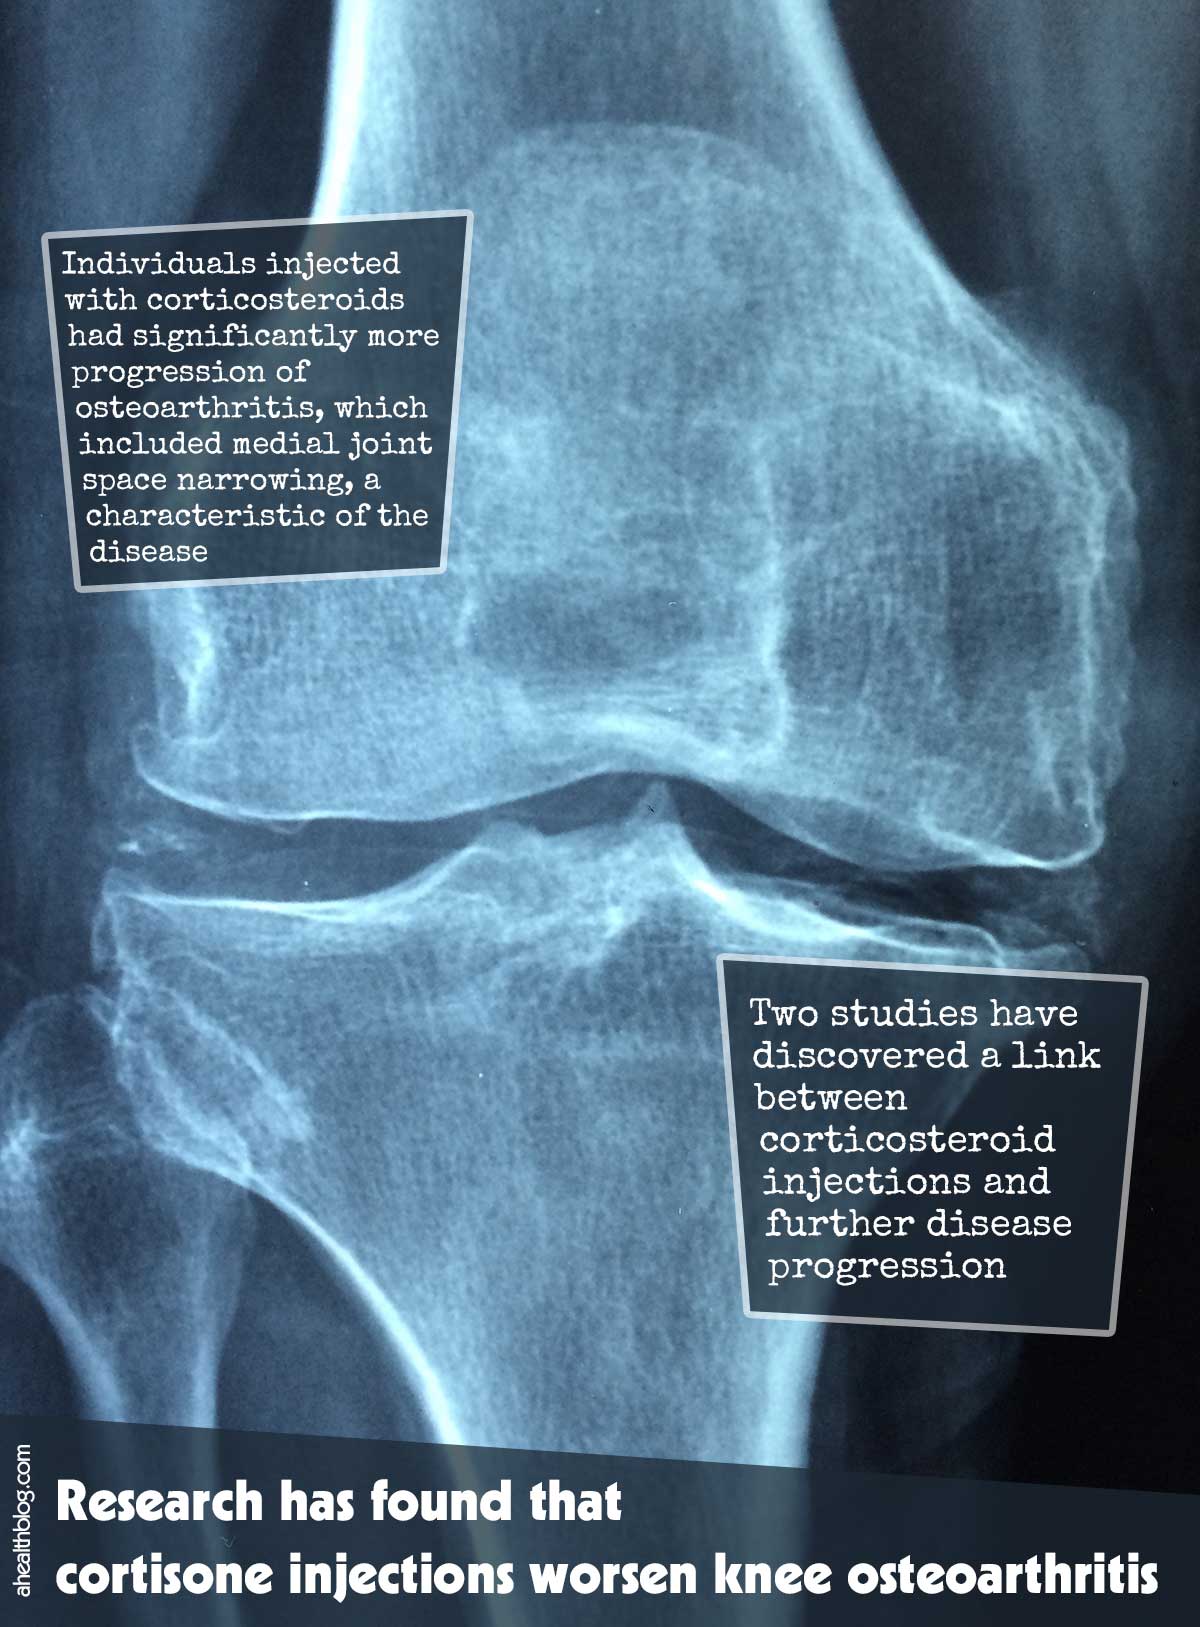 Research Has Found That Cortisone Injections Worsen Knee Osteoarthritis